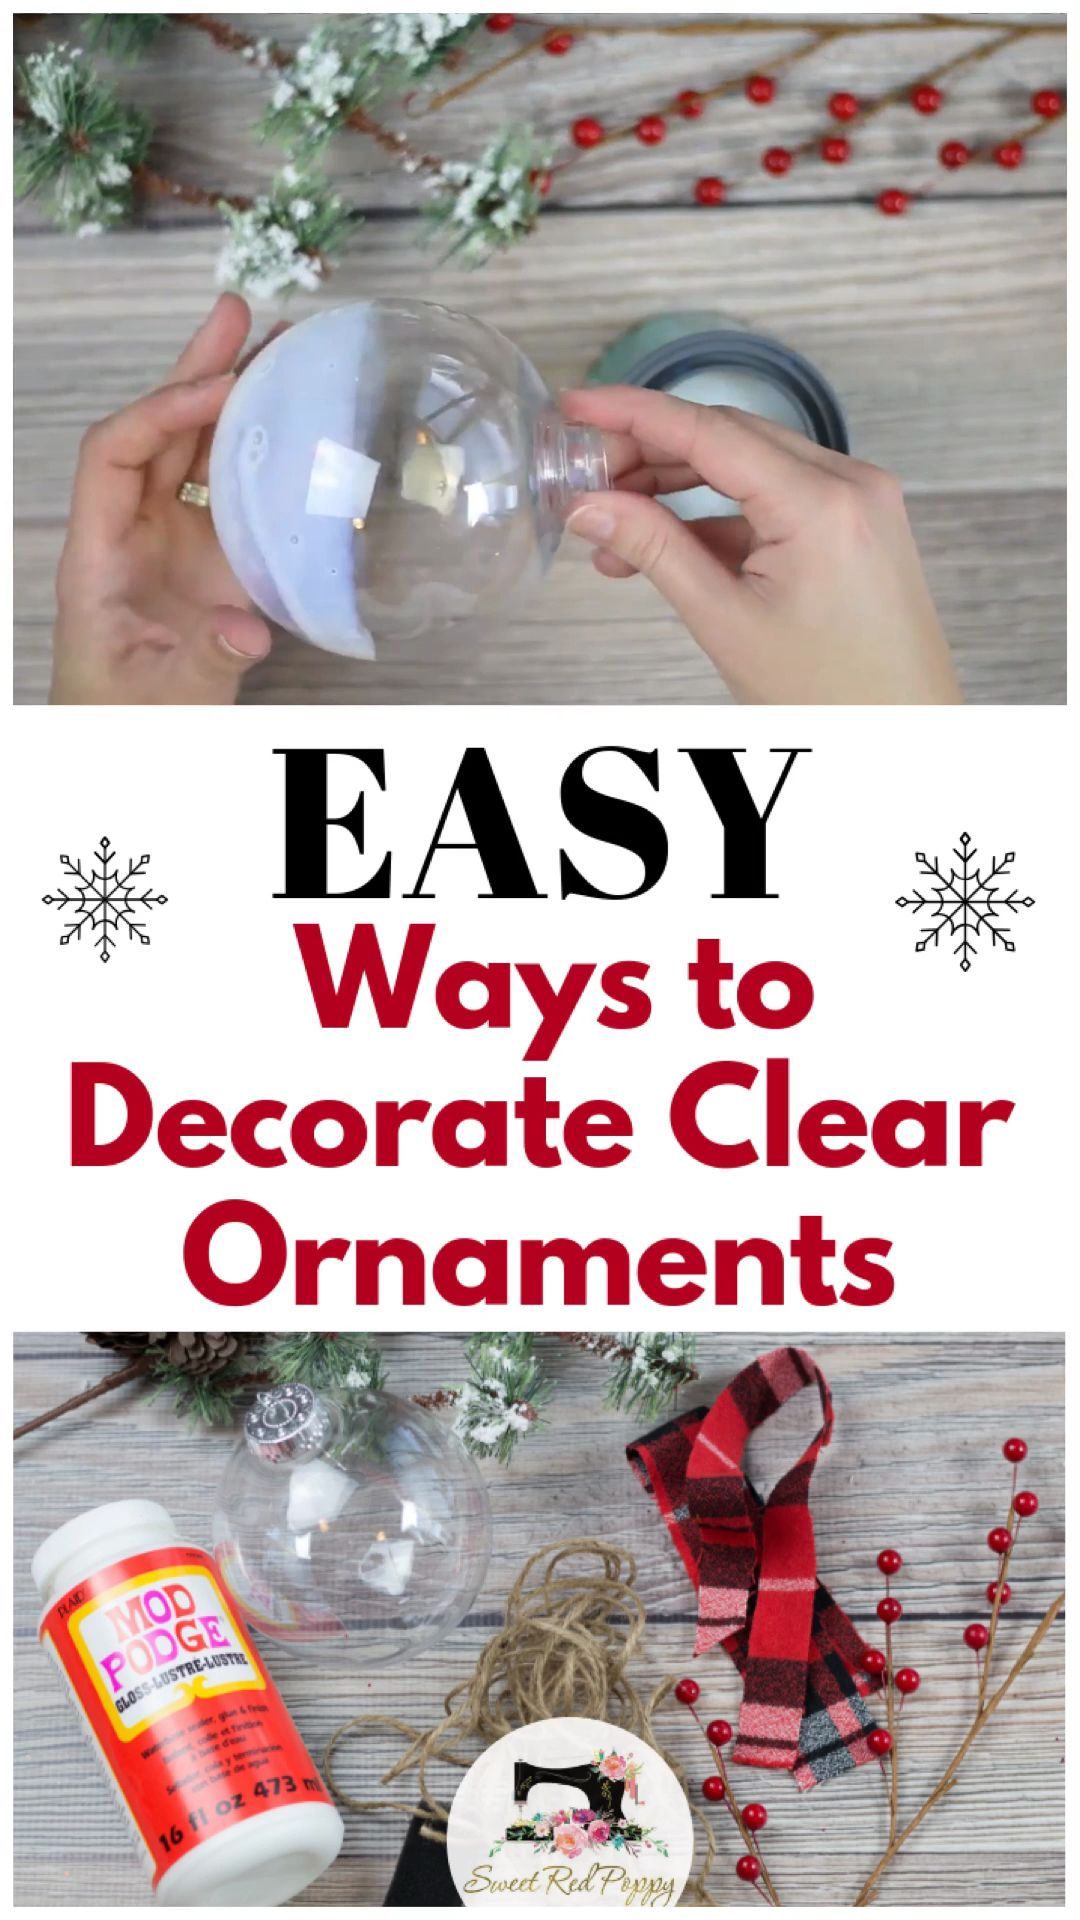 Easy Ways to Decorate Clear Plastic Ornaments for Christmas - Sweet Red Poppy - Easy Ways to Decorate Clear Plastic Ornaments for Christmas - Sweet Red Poppy -   18 diy Christmas gifts ideas